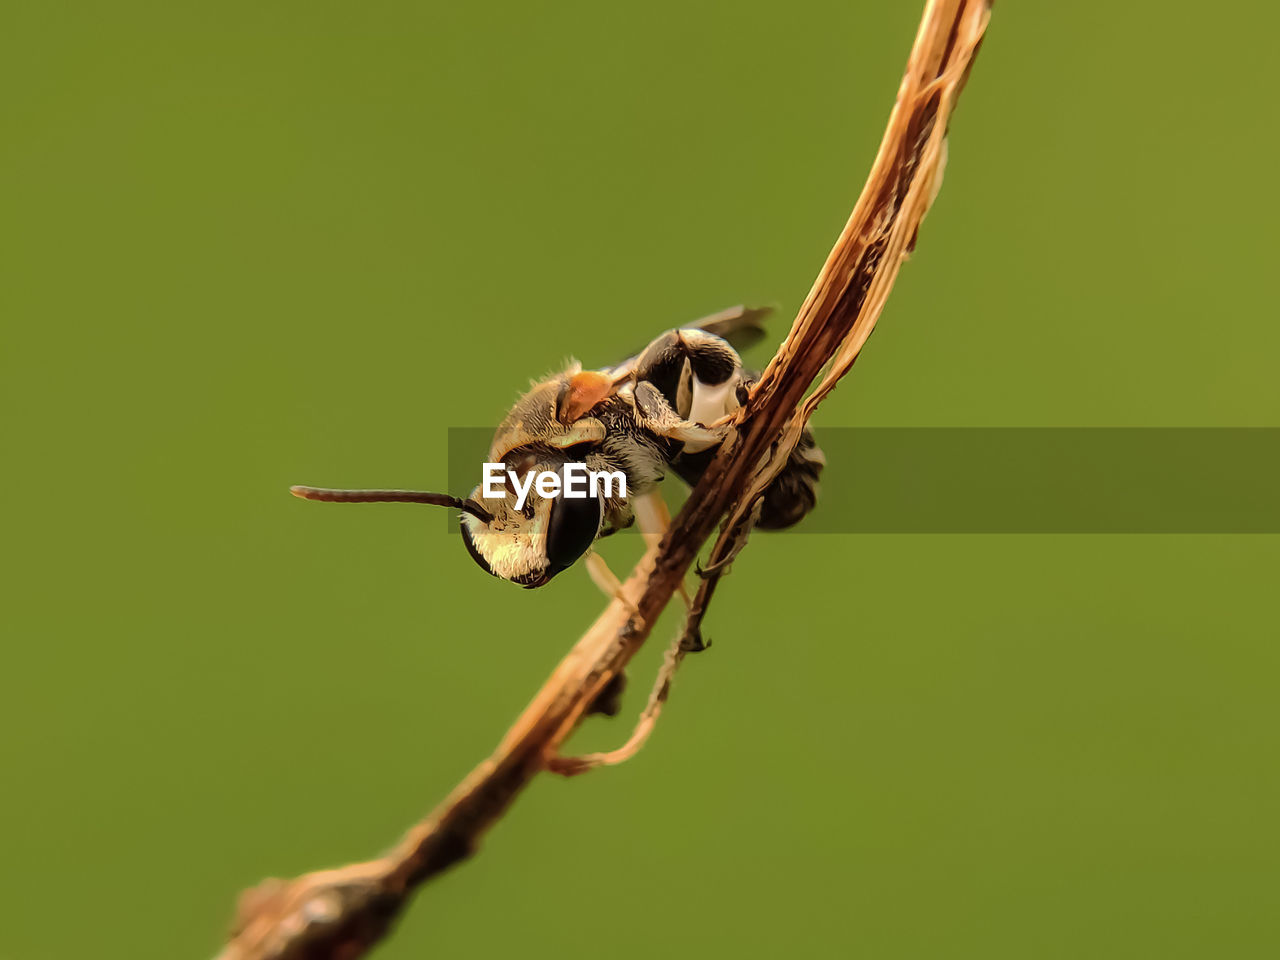 CLOSE-UP OF HOUSEFLY ON TWIG